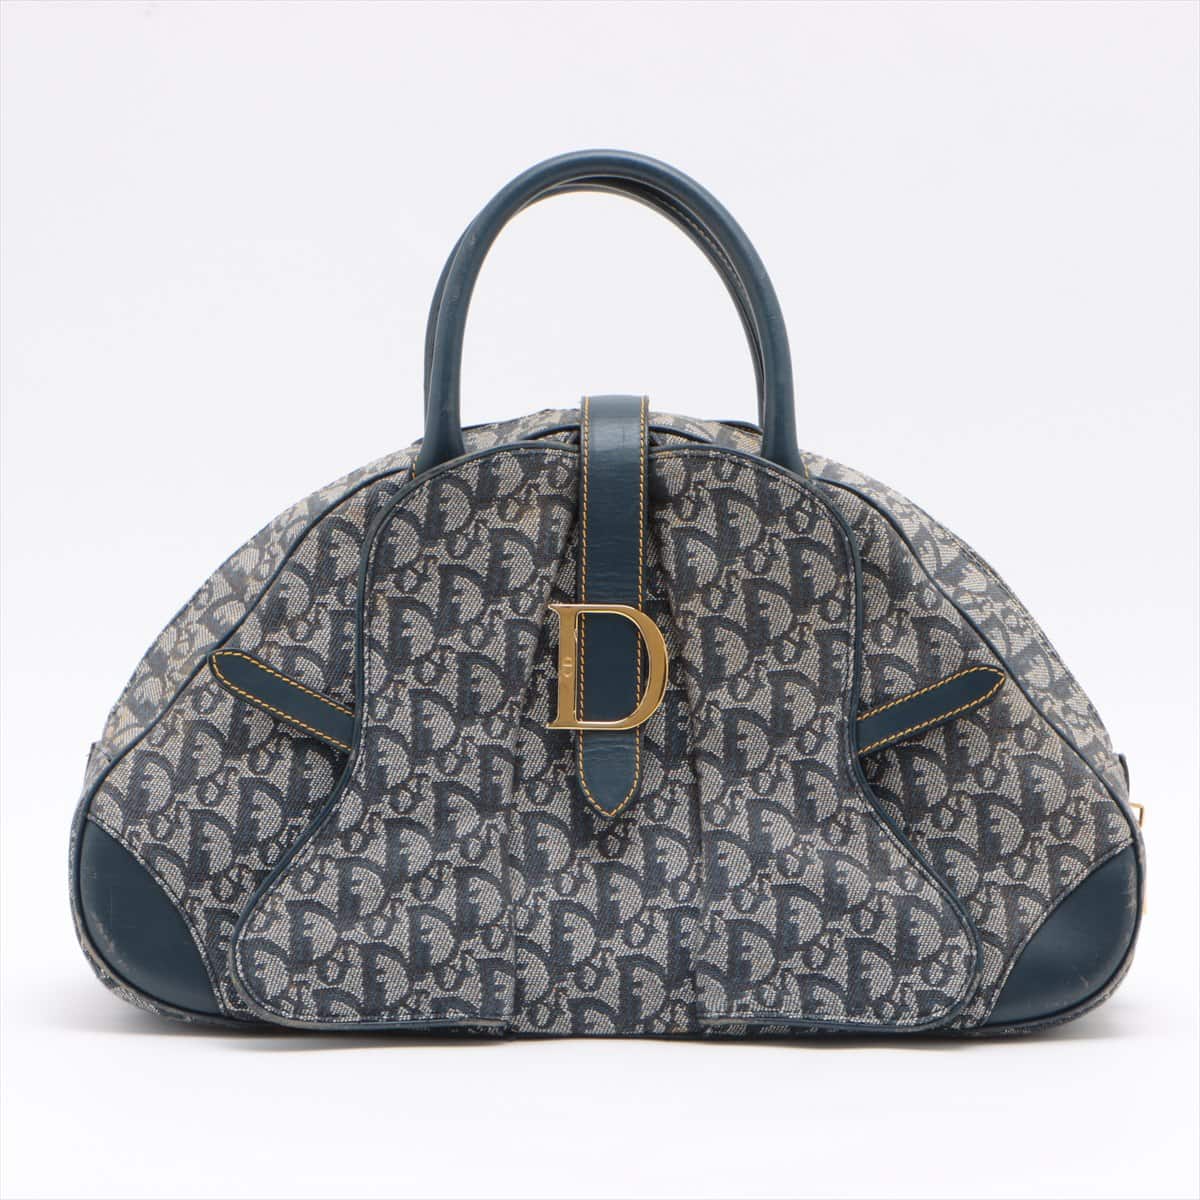 Christian Dior Trotter Double saddle Canvas & leather Hand bag Navy blue